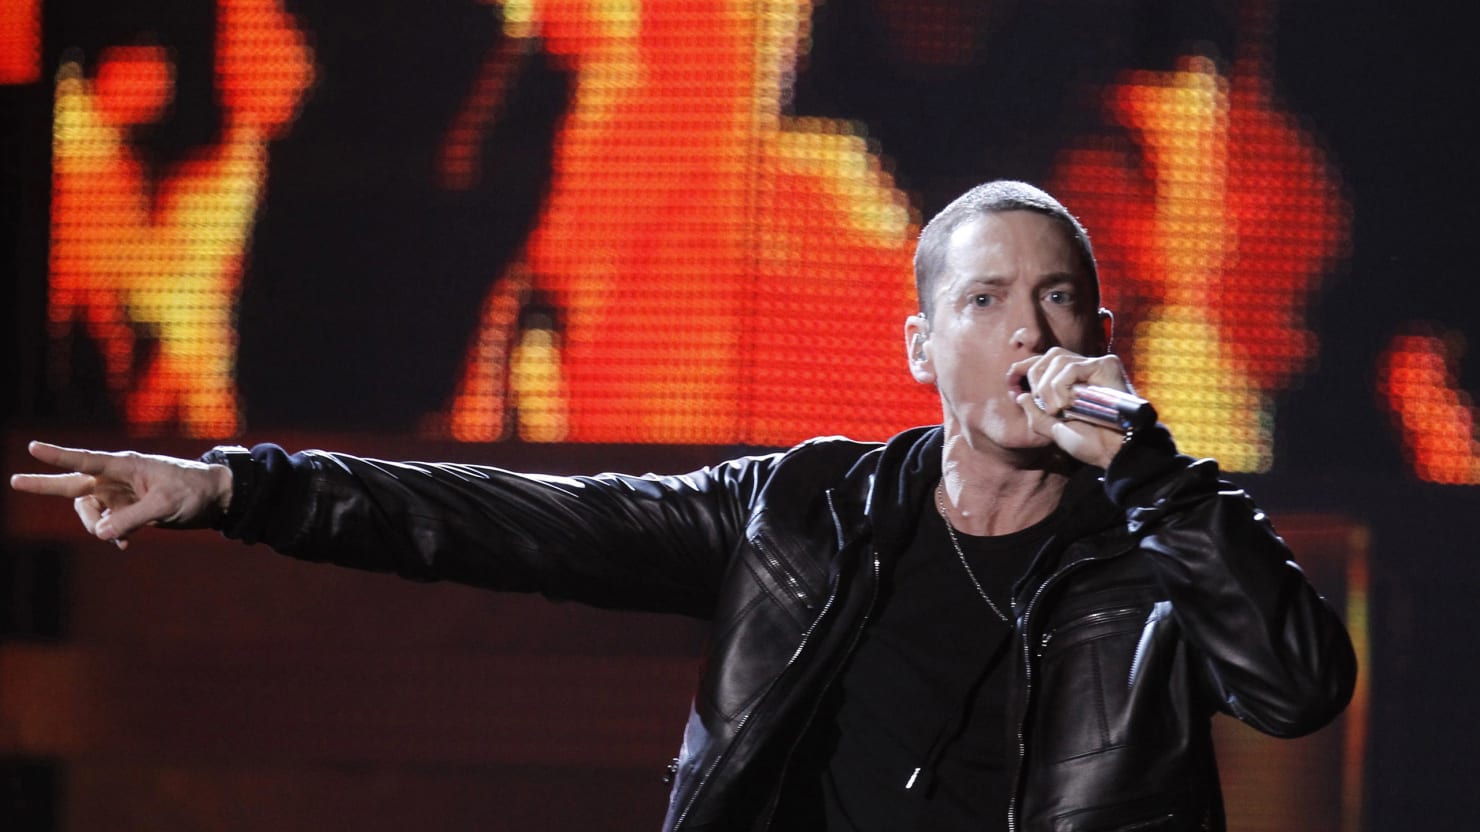 Eminem’s Anti-Trump Freestyle Is as Flaccid as Trump’s Campaign1480 x 832